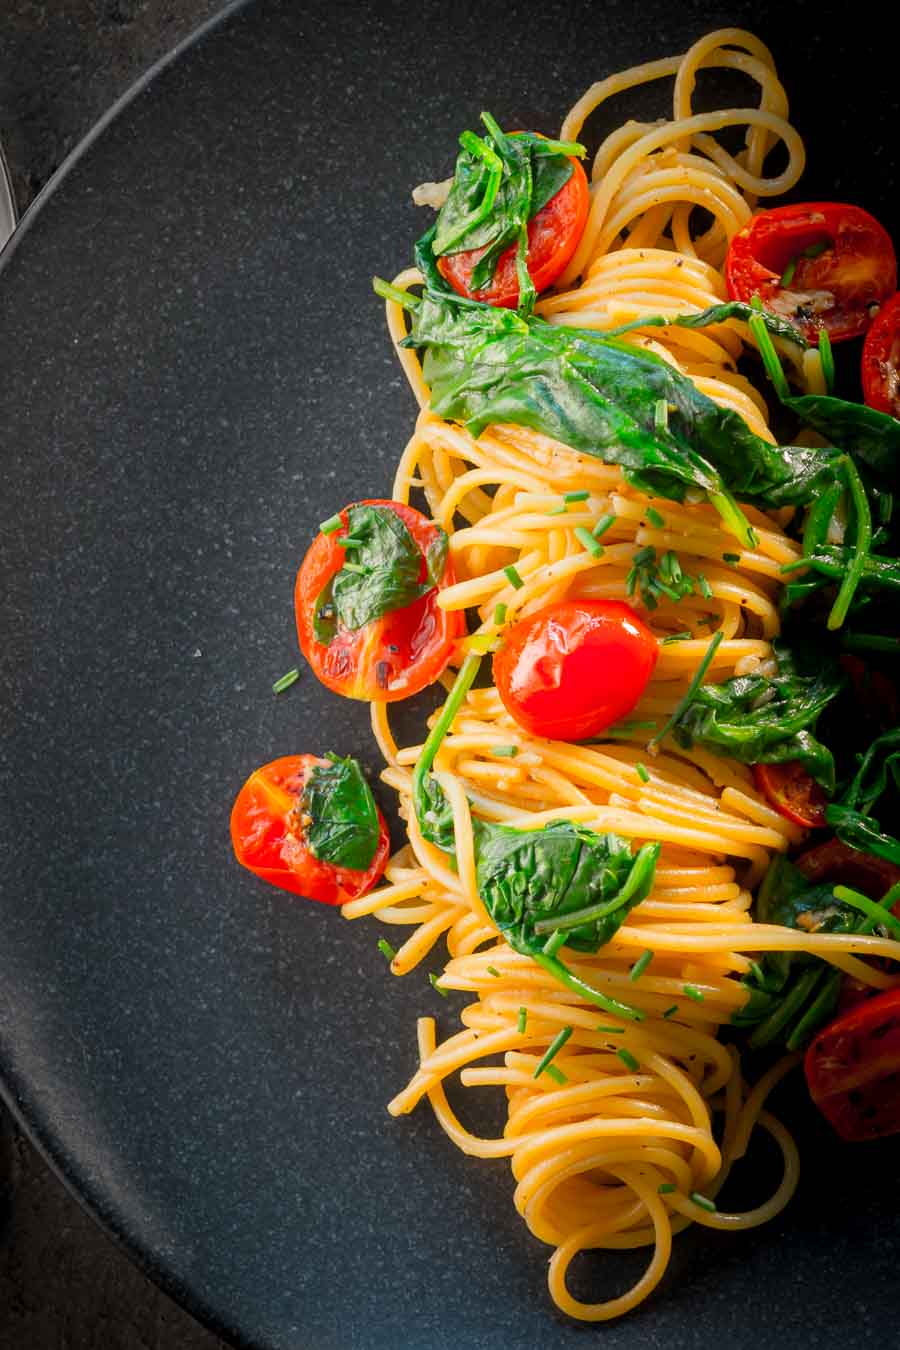 Roasted Garlic Pasta with Tomatoes and Spinach